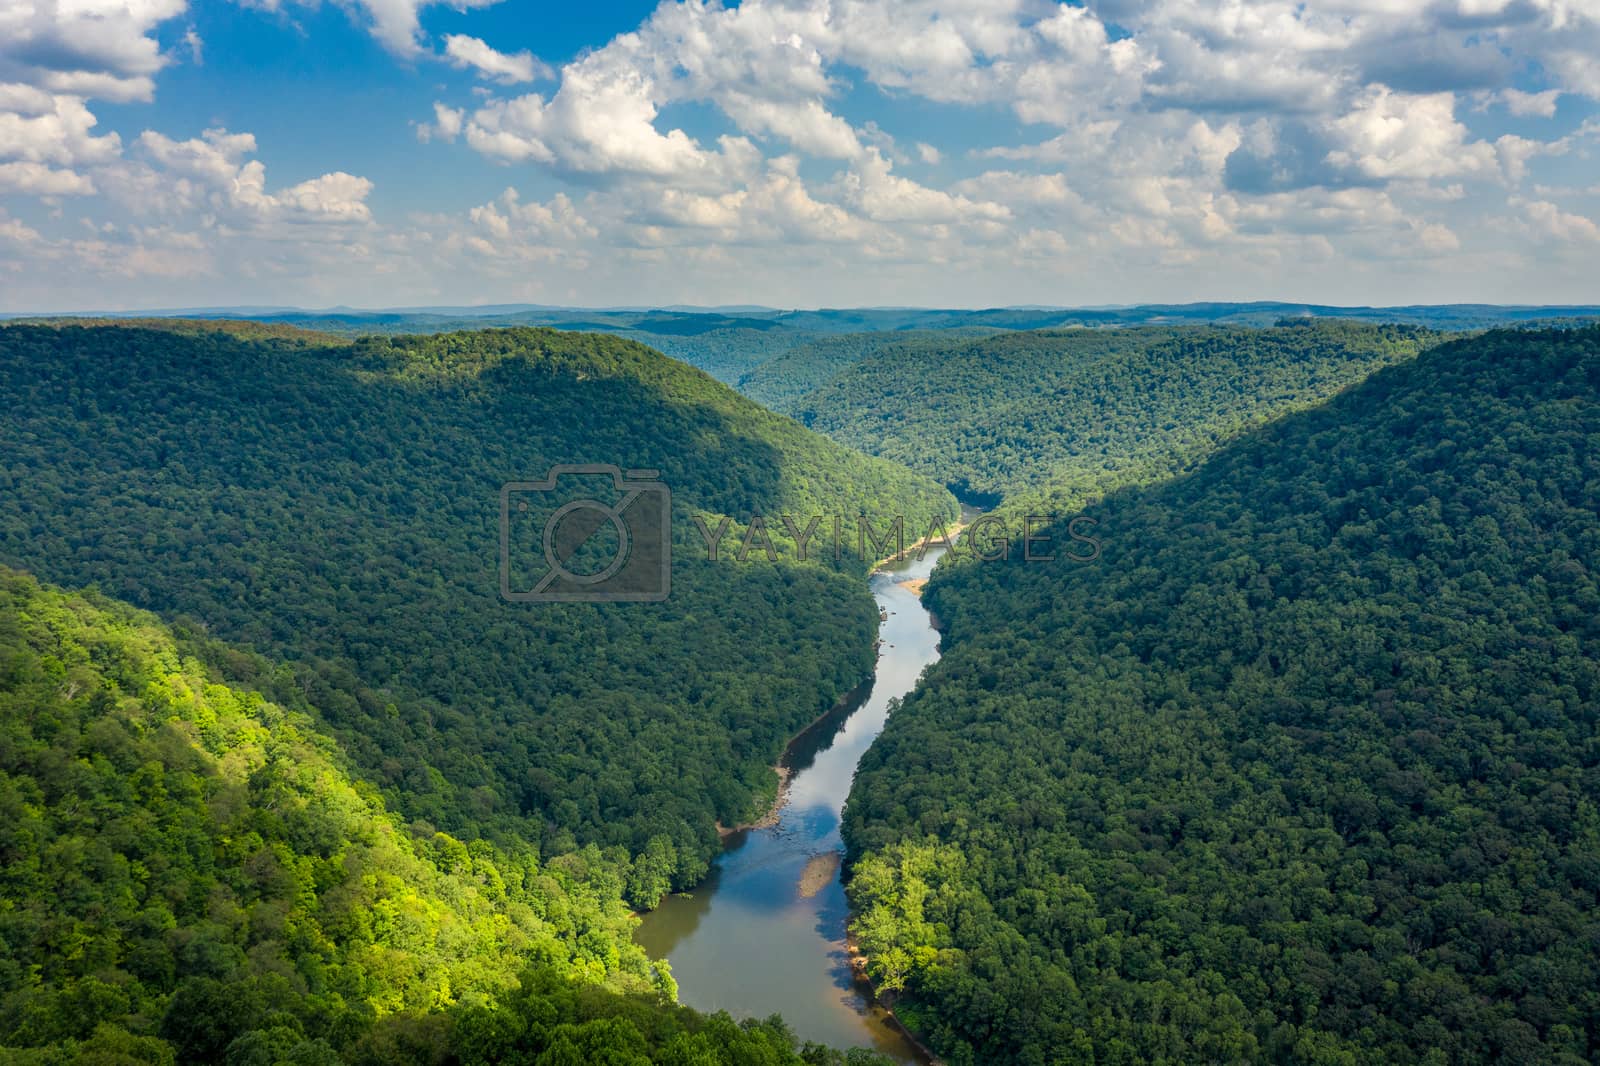 Royalty free image of Narrow gorge of the Cheat River upstream of Coopers Rock State Park in West Virginia by steheap